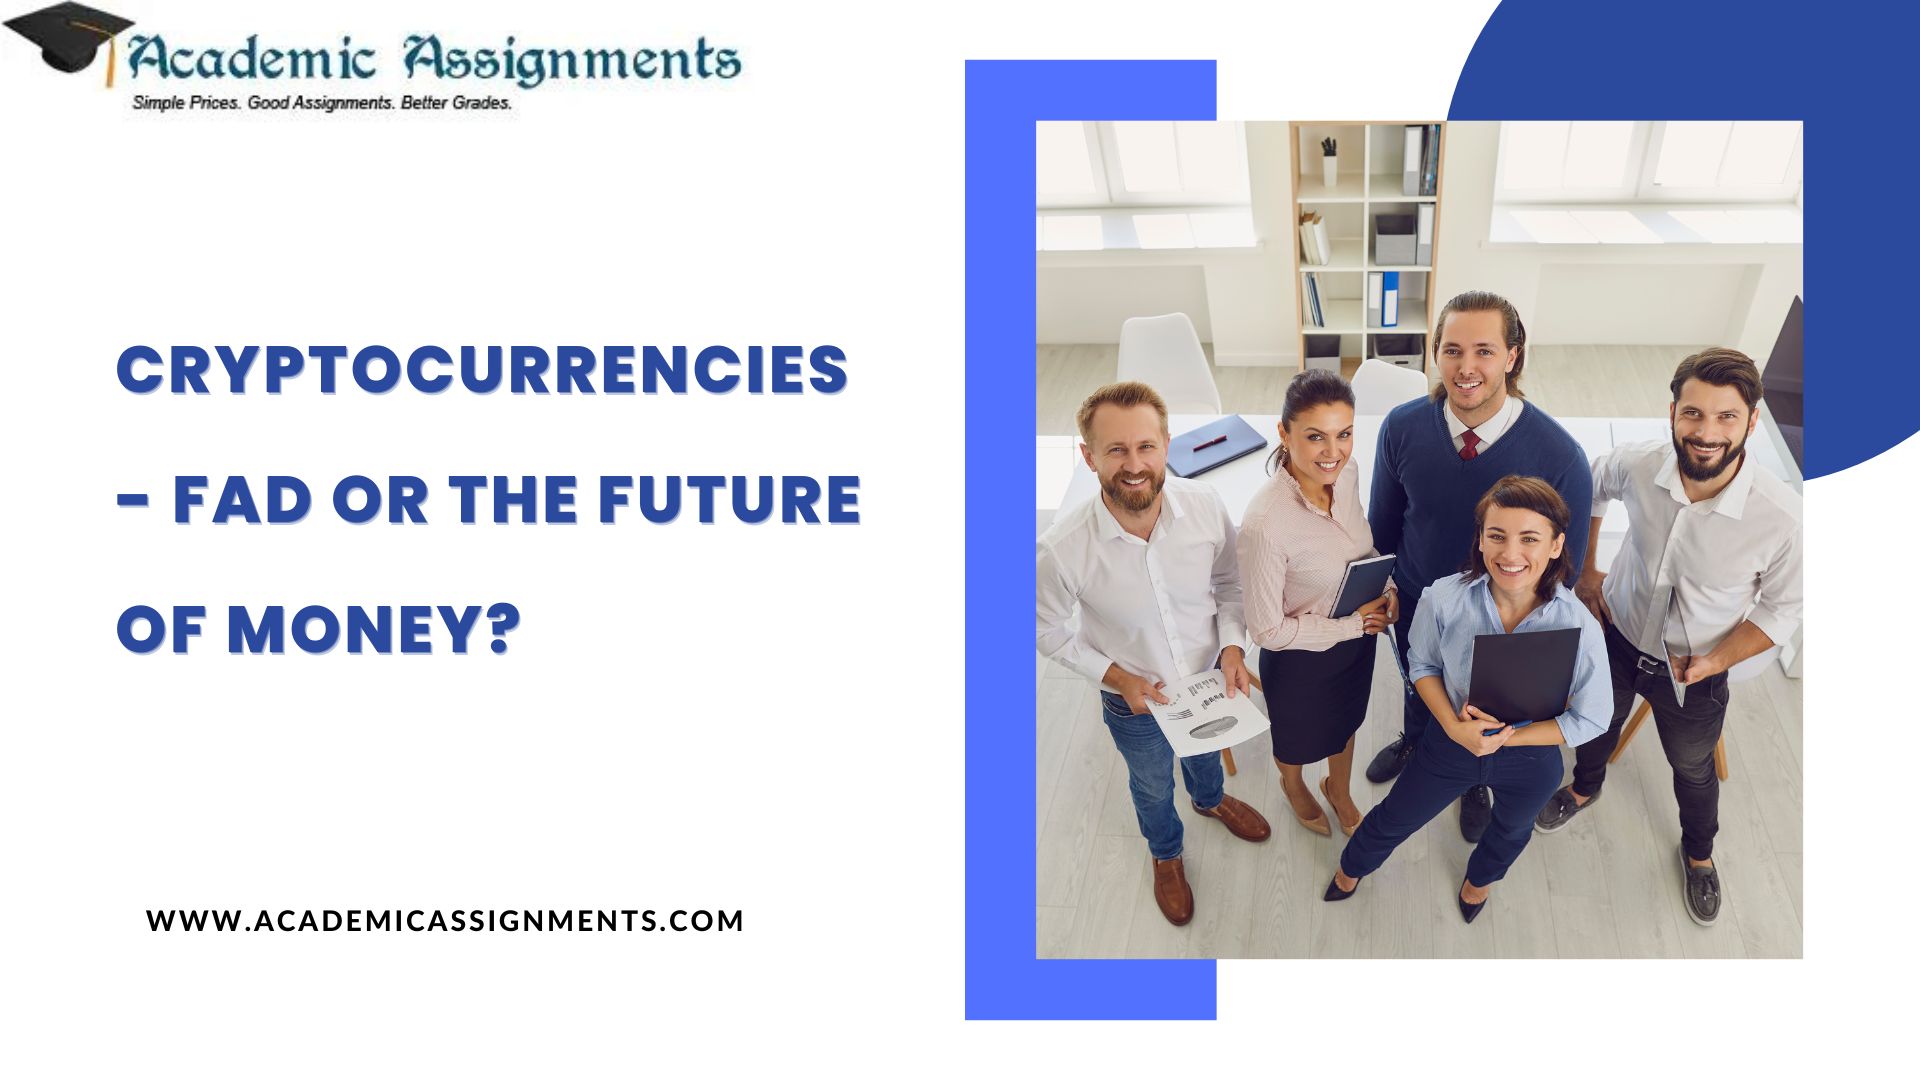 Cryptocurrencies - fad or the future of money